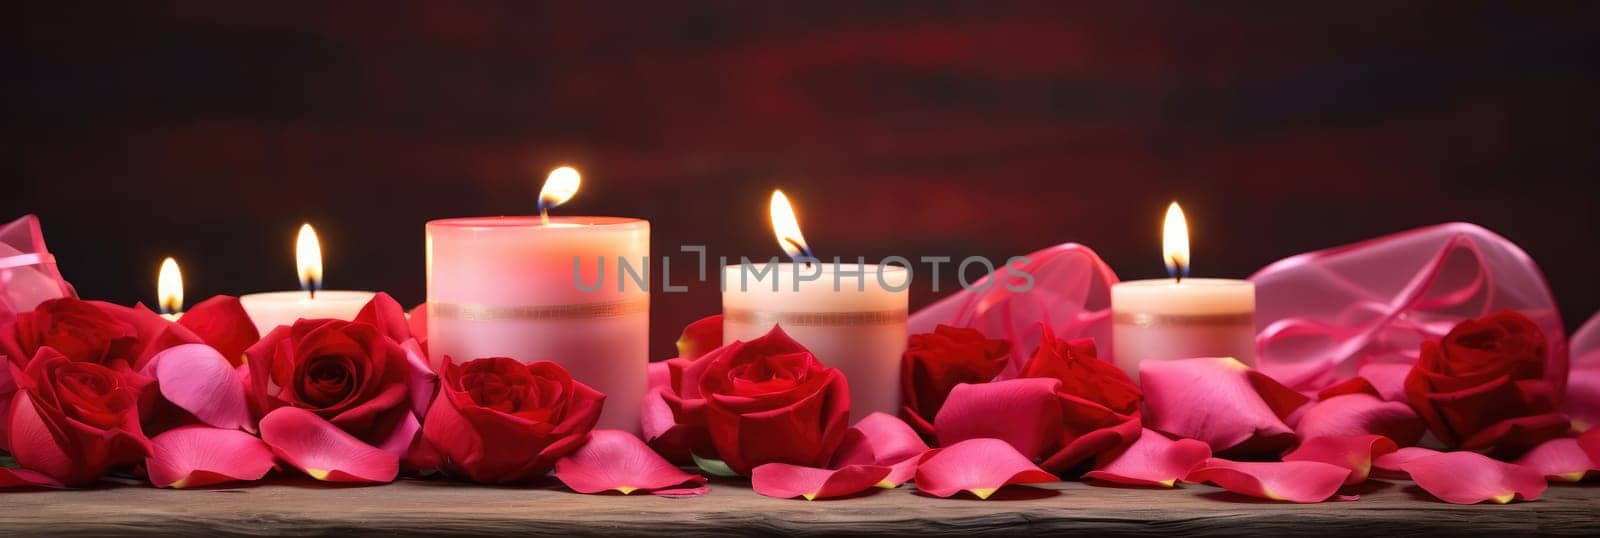 St. Valentines day, wedding banner with abstract illustrated red, pink rose petals, candles, roses on dark background. Use for cute love sale banner, print, greeting card. Concept love, copy space